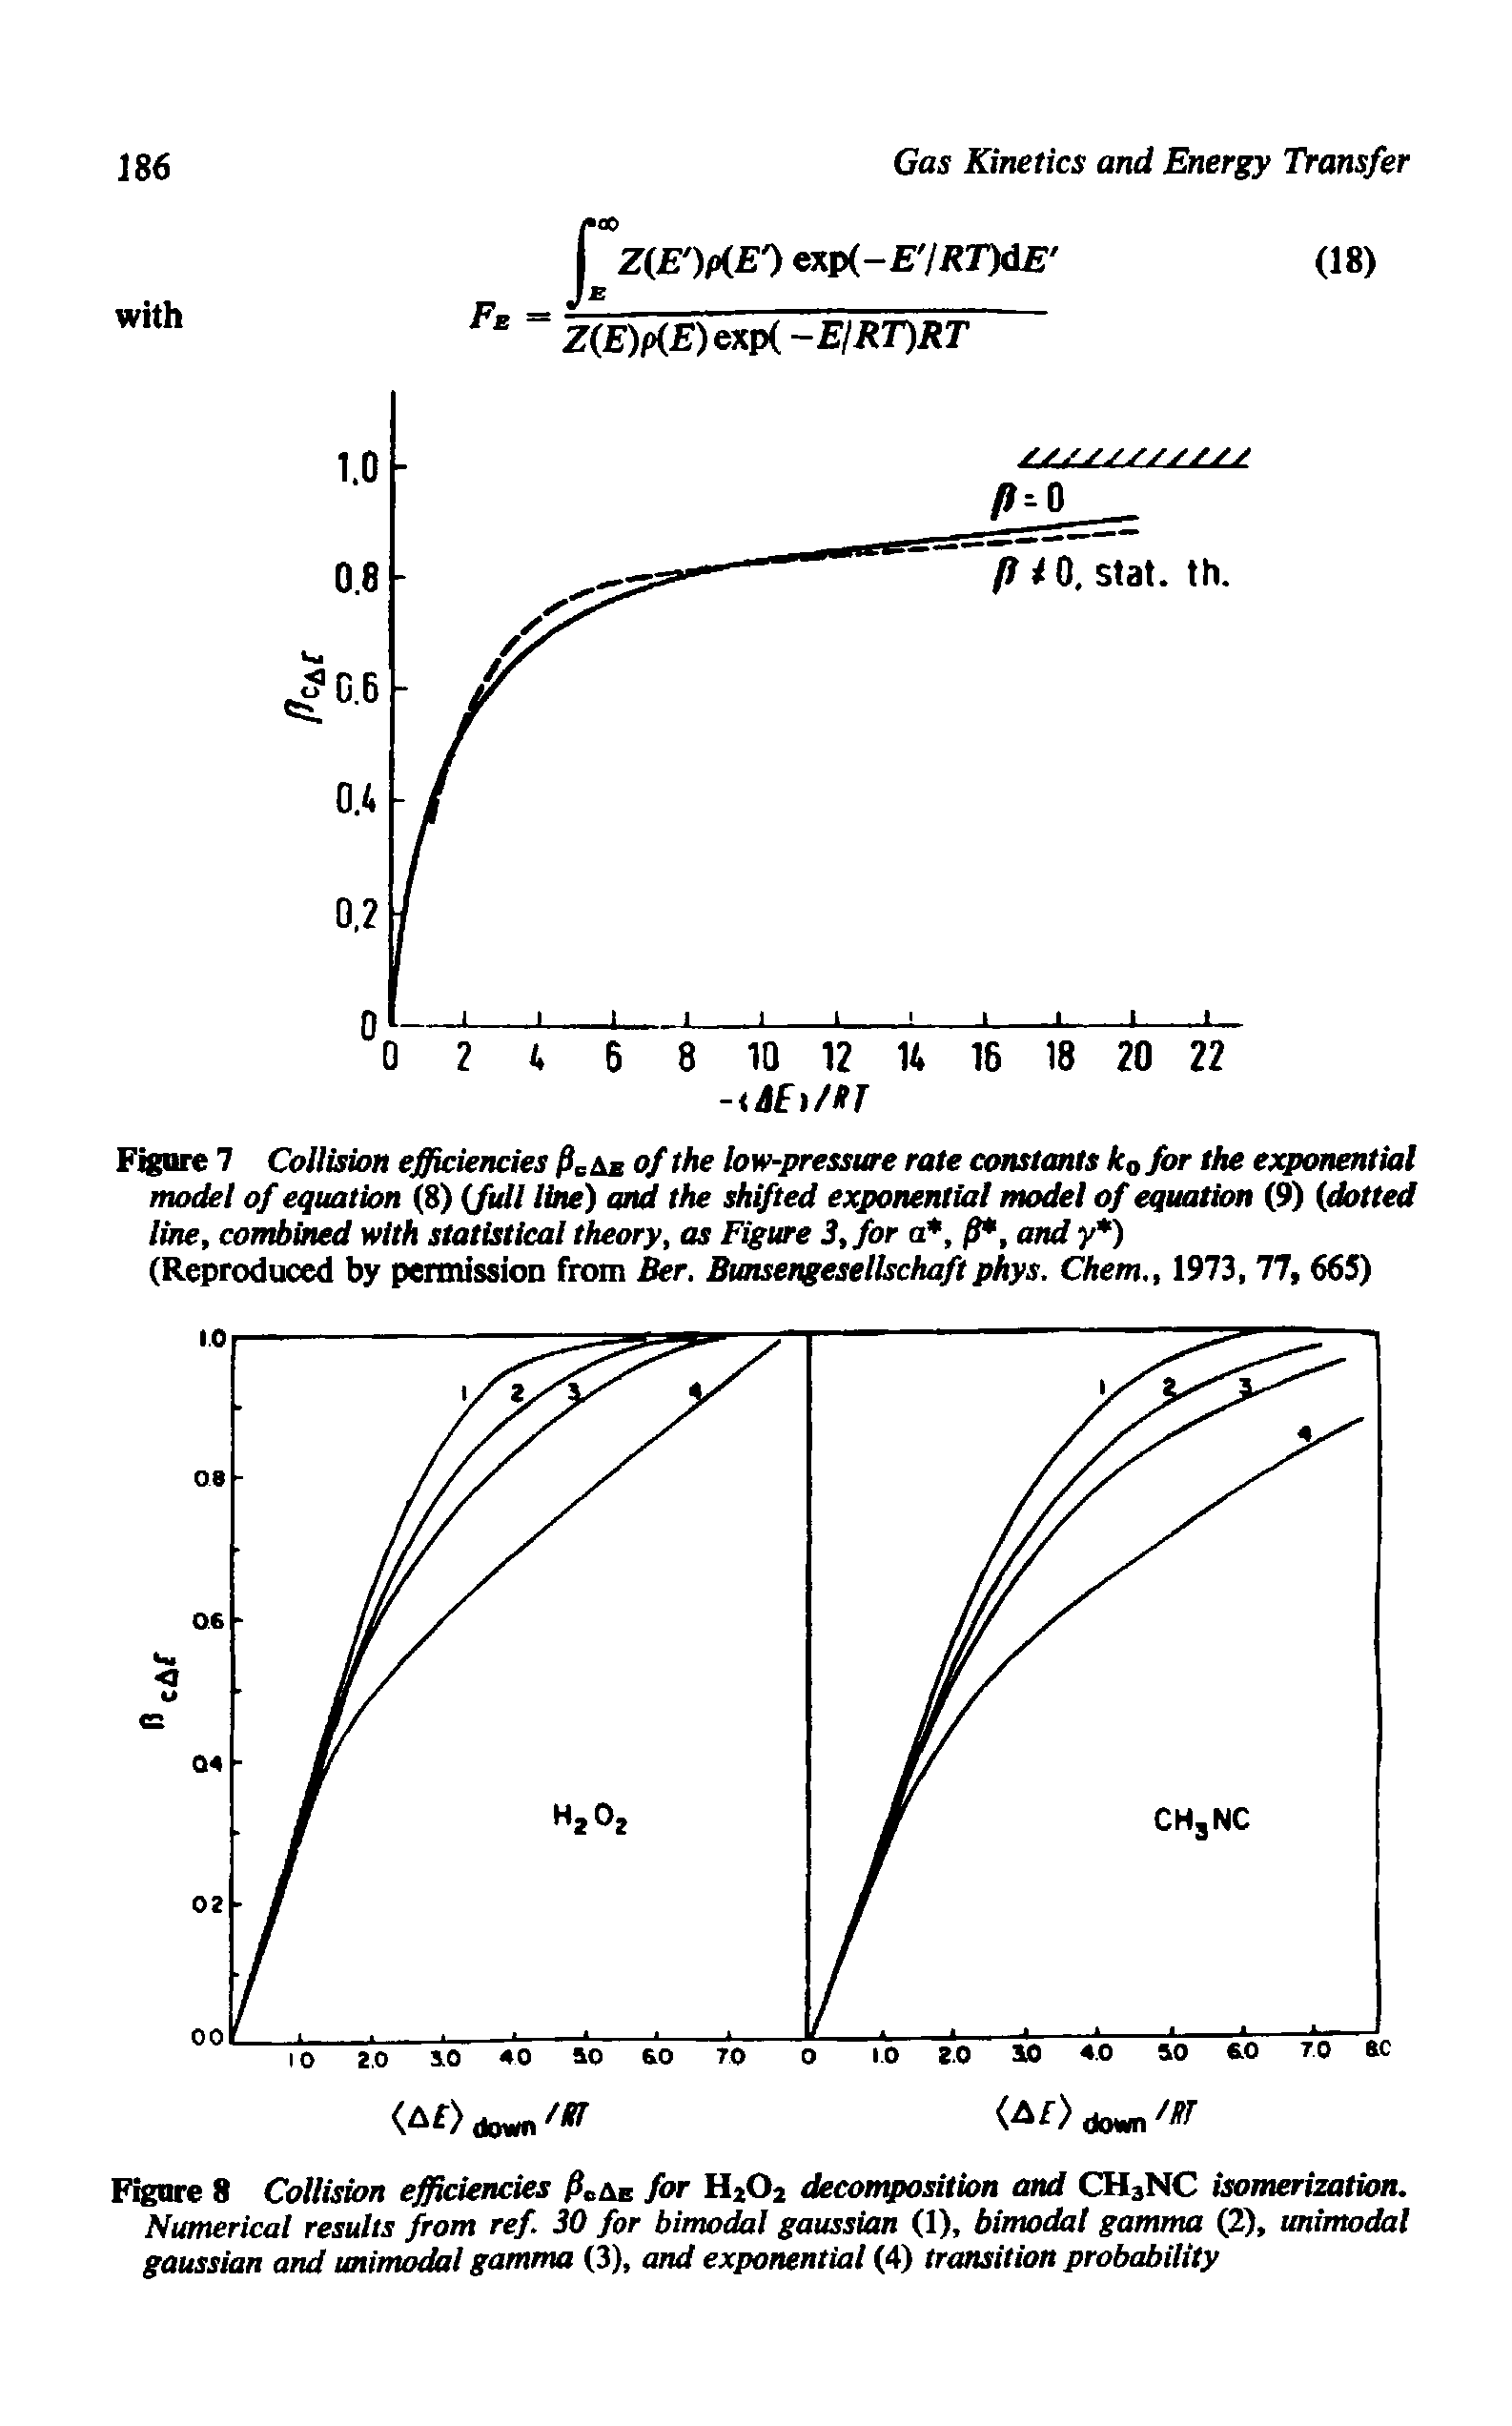 Figure 7 Collision efficiencies Ac of the low-pressure rate constants kofor the expmwntial model of equation (8) (full Ibie) and the shifted exponential model of equatum (9) (dotted line, combined with statistical theory, as Figure 3, for a, ft, and y )...